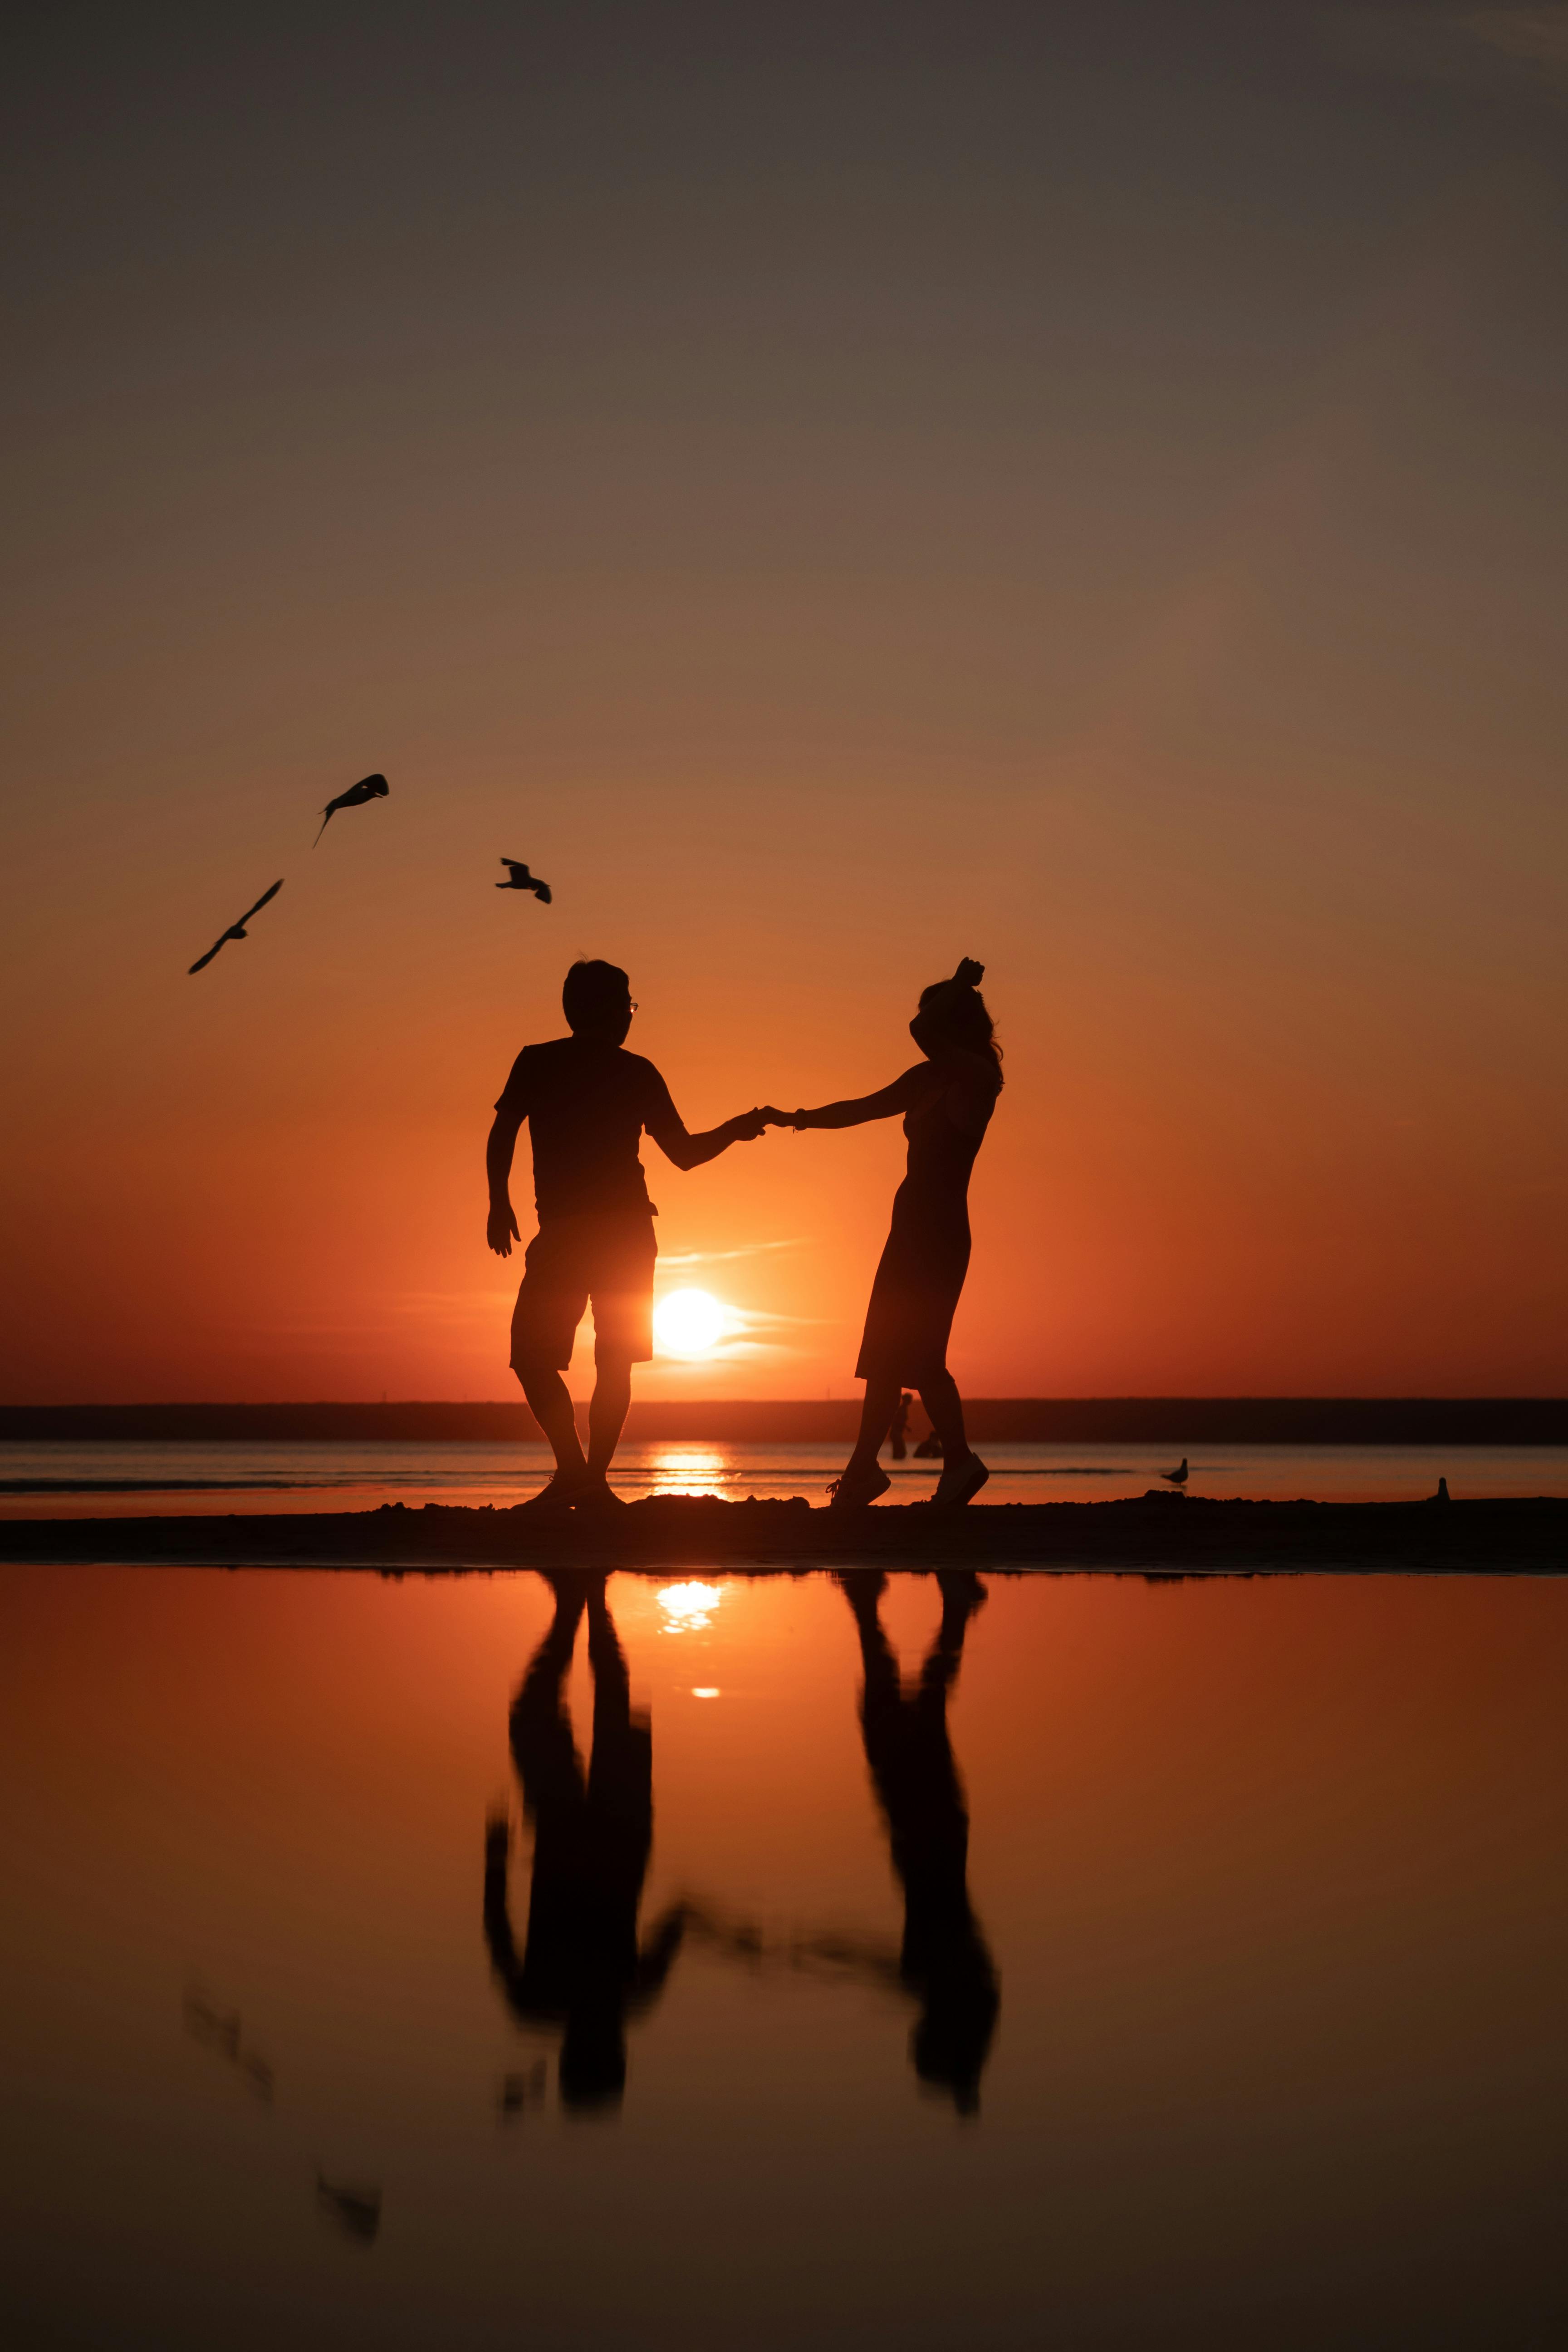 Intimate couple silhouette Stock Photos and Images | agefotostock